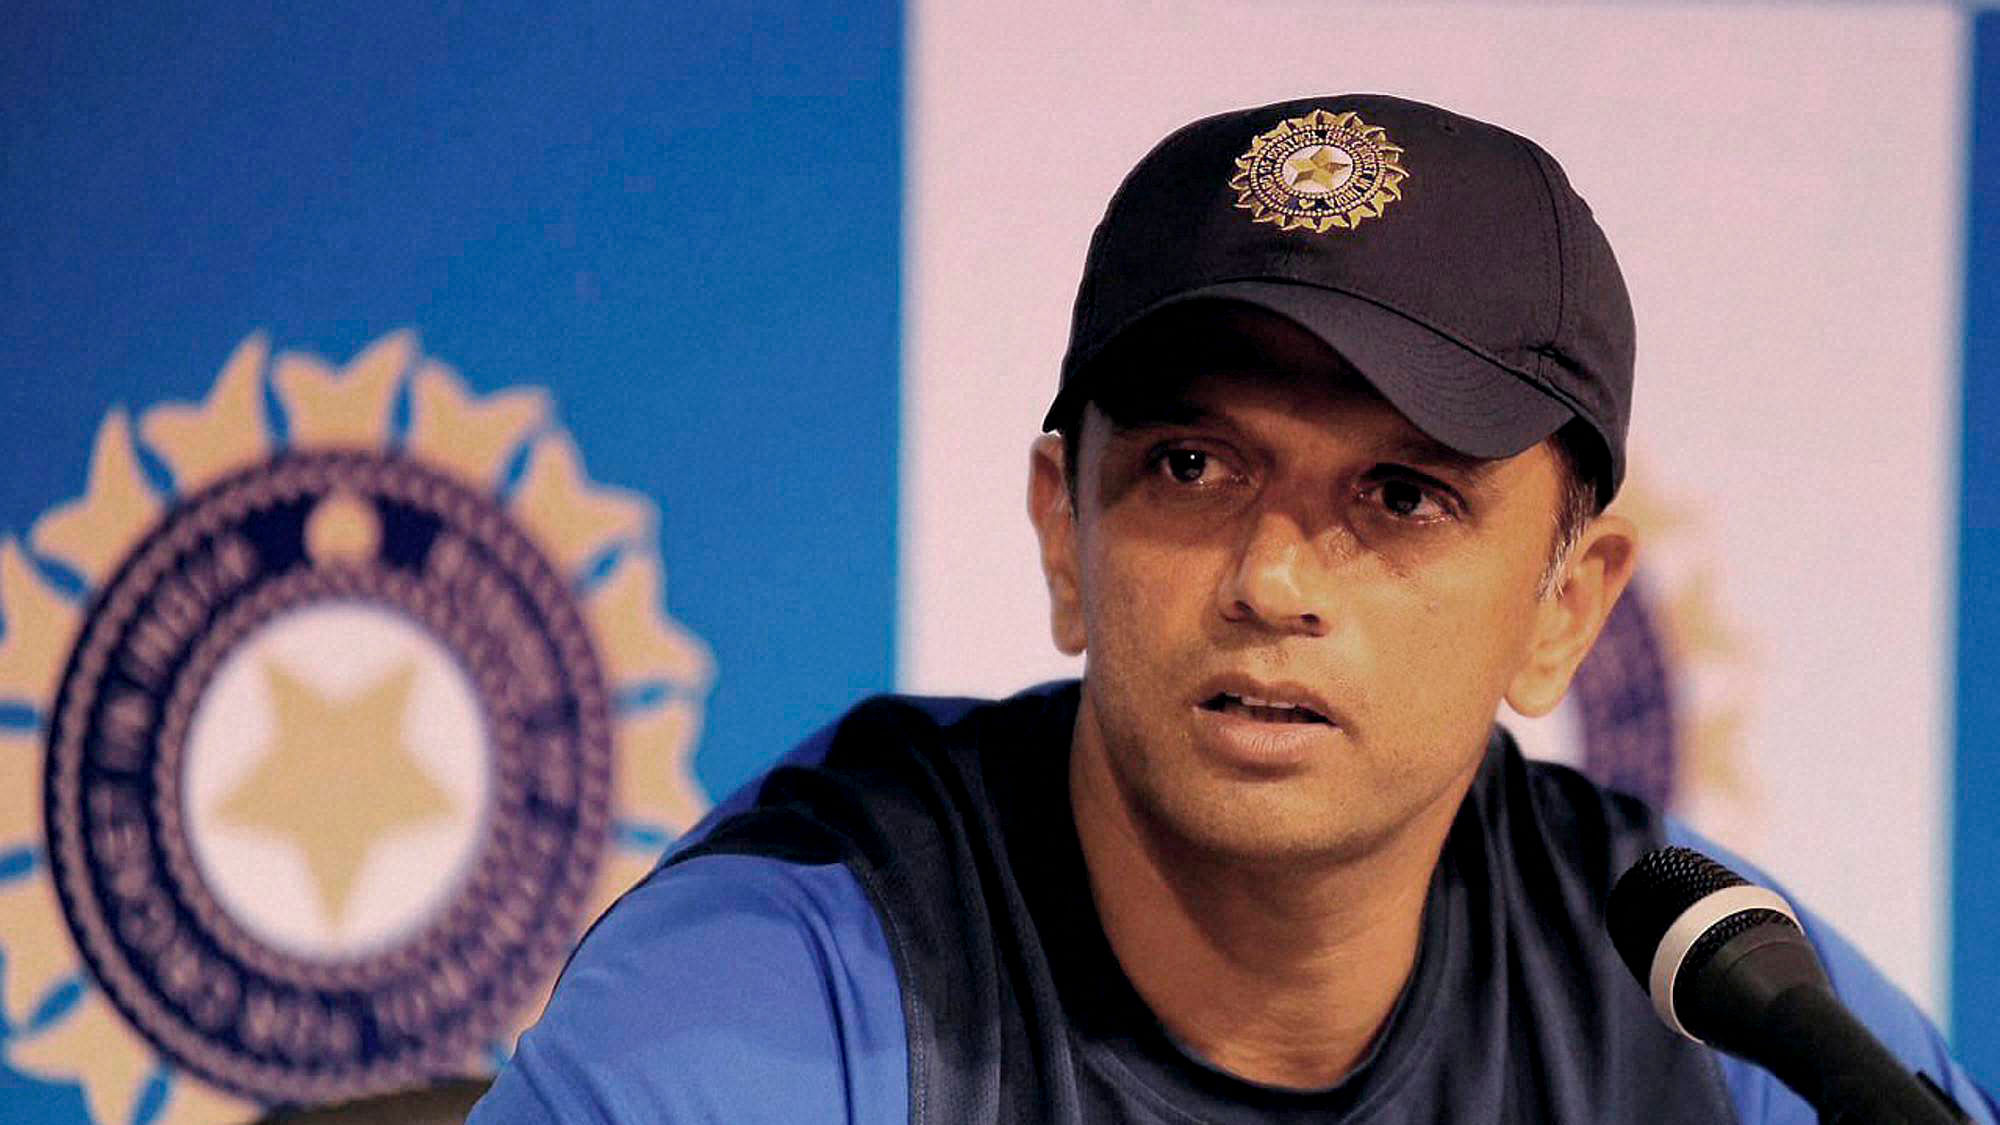 India A coach Rahul Dravid speaks to the media before the team’s fixture against Australia A on Wednesday. (Photo: PTI)